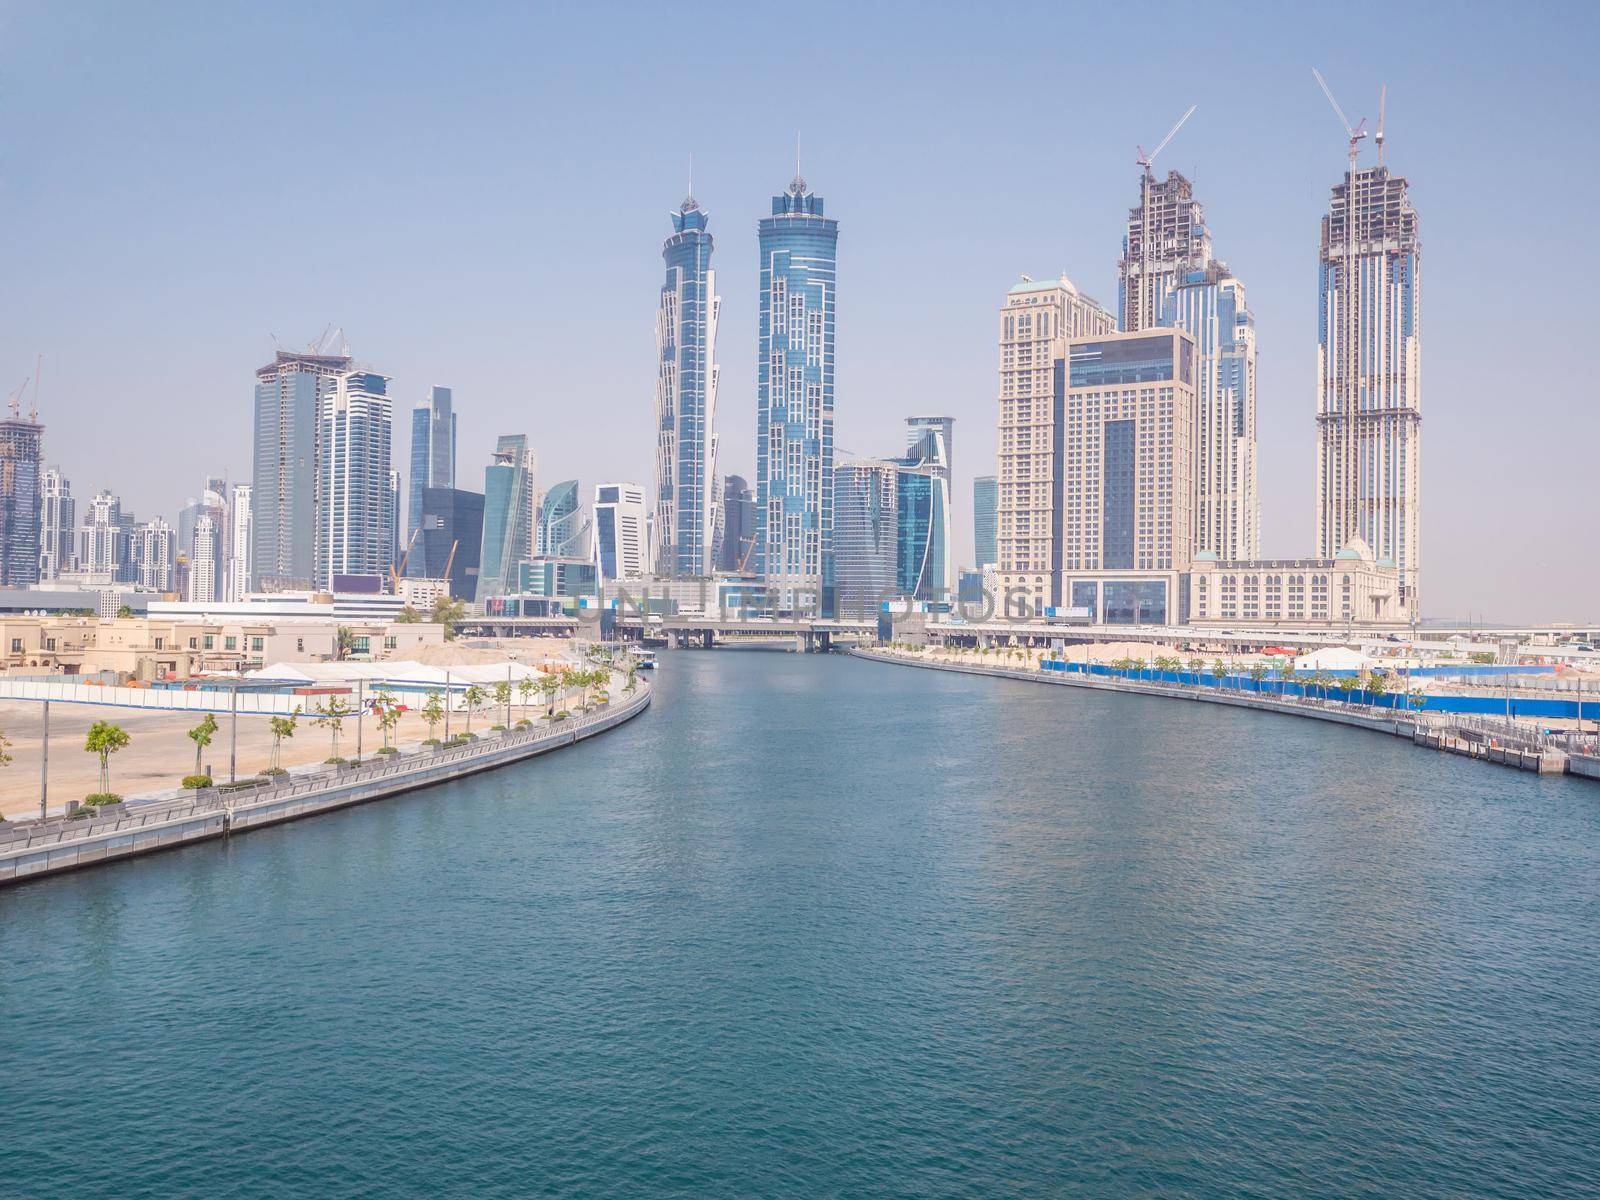 Panorama of the city of Dubai from the bridge of the river channel Dubai Creek by DovidPro